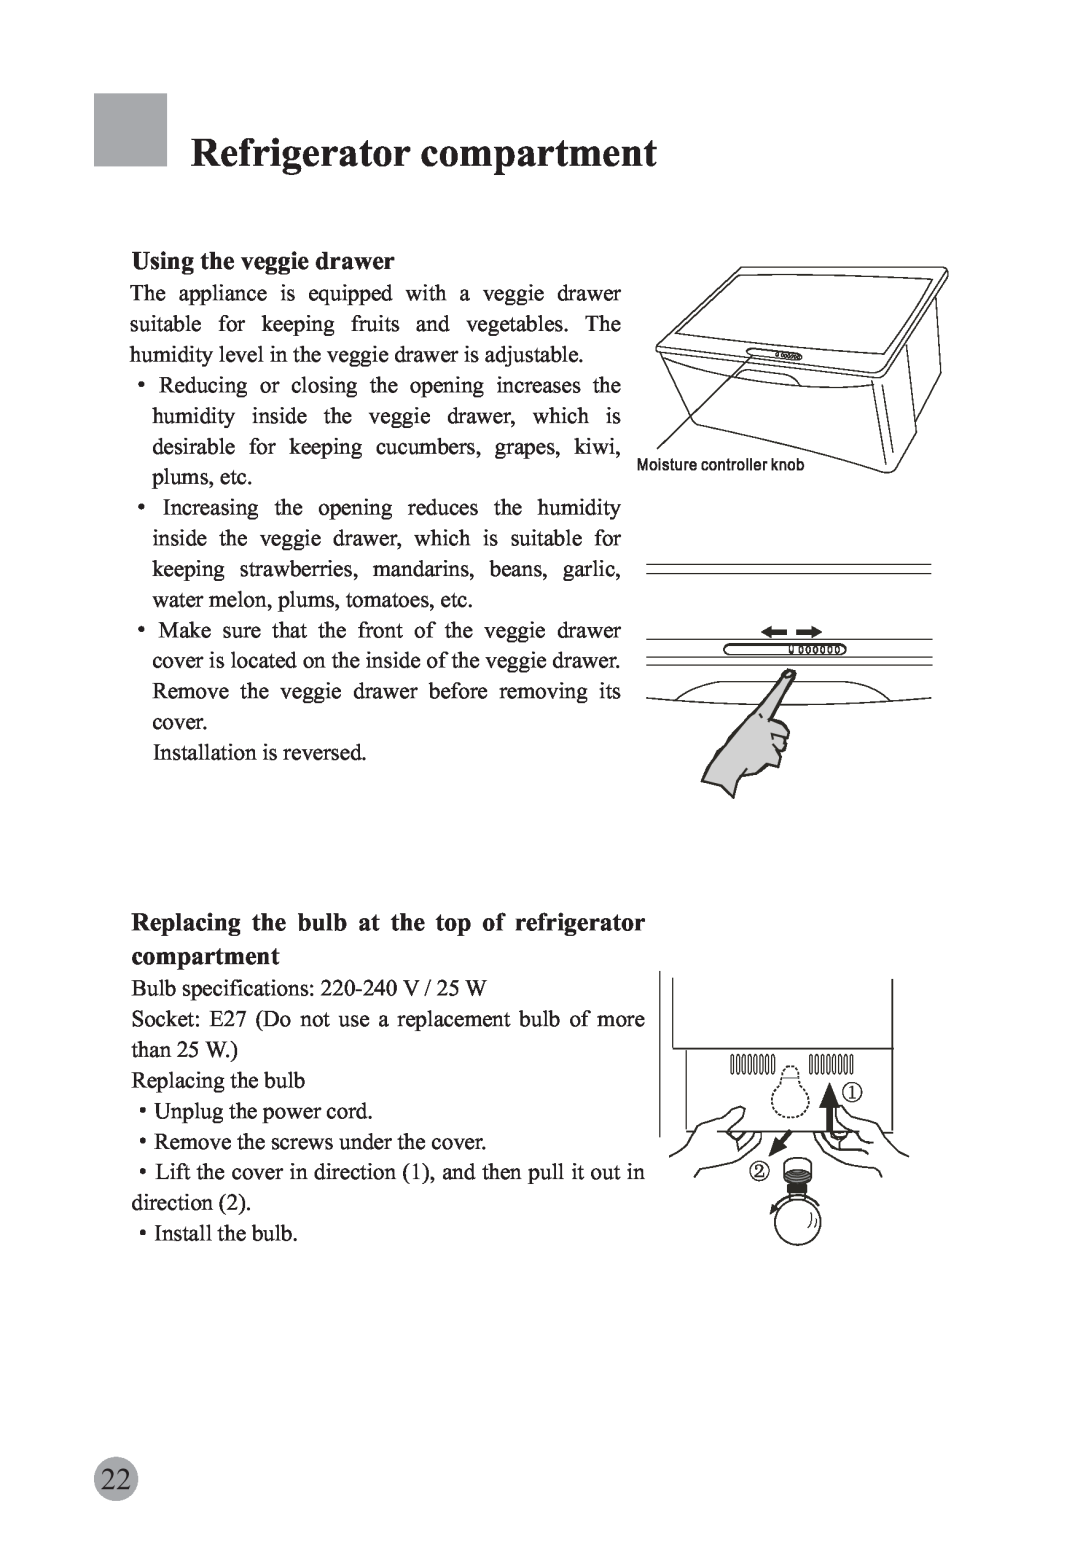 Haier HRF-663ISB2, HRF-663CJ manual Using the veggie drawer, Replacing the bulb at the top of refrigerator, compartment 